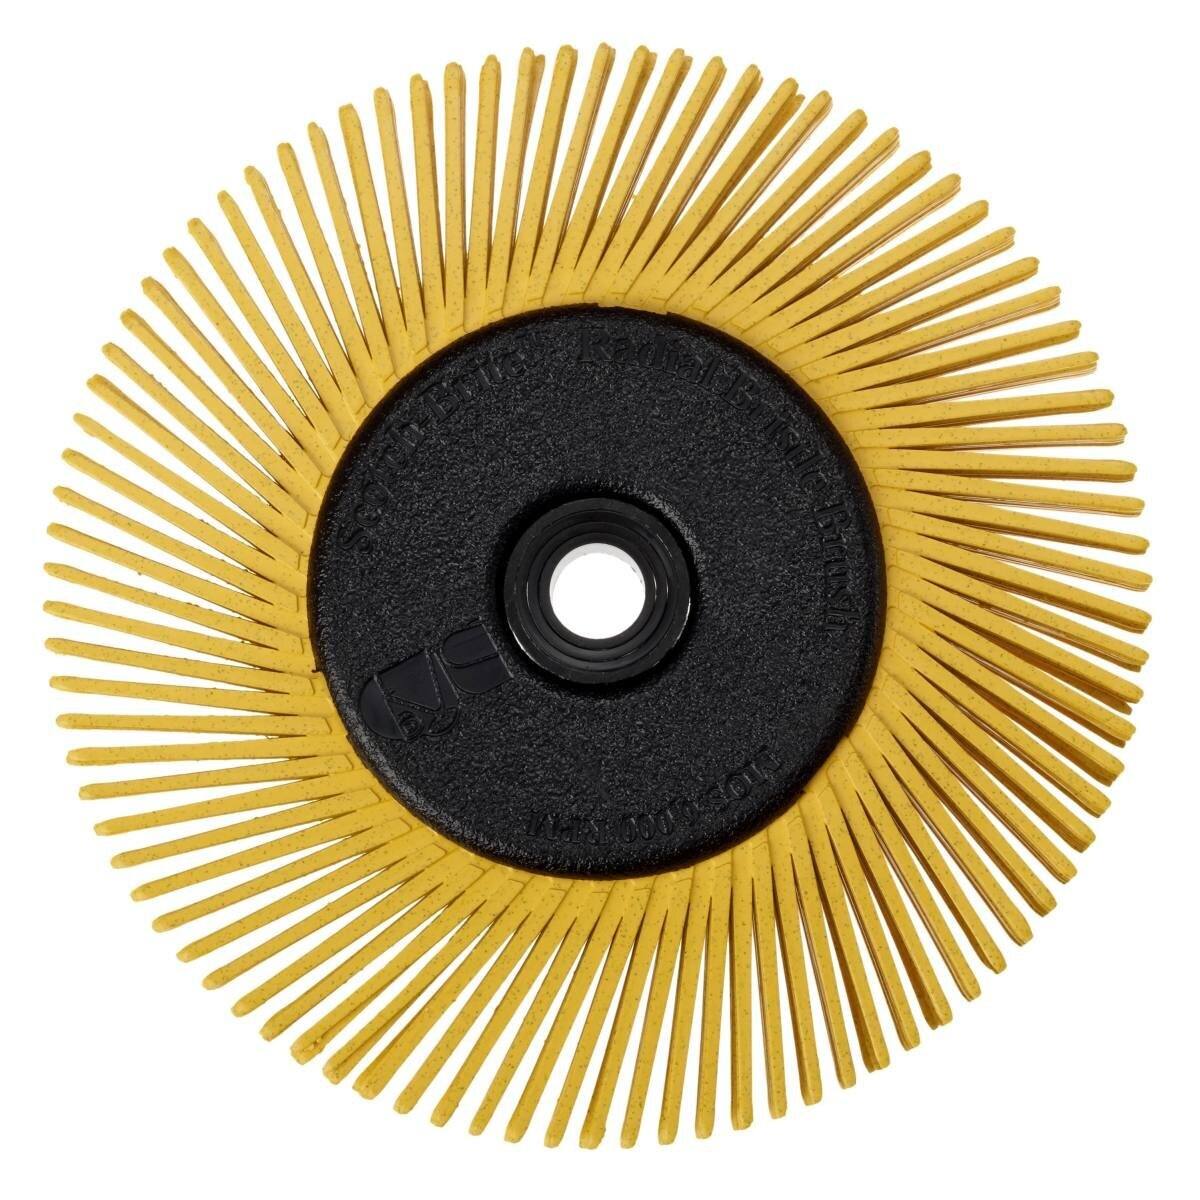 3M Scotch-Brite Radial Bristle Disc BB-ZB with flange, yellow, 152.4 mm, P80, Type A #27606